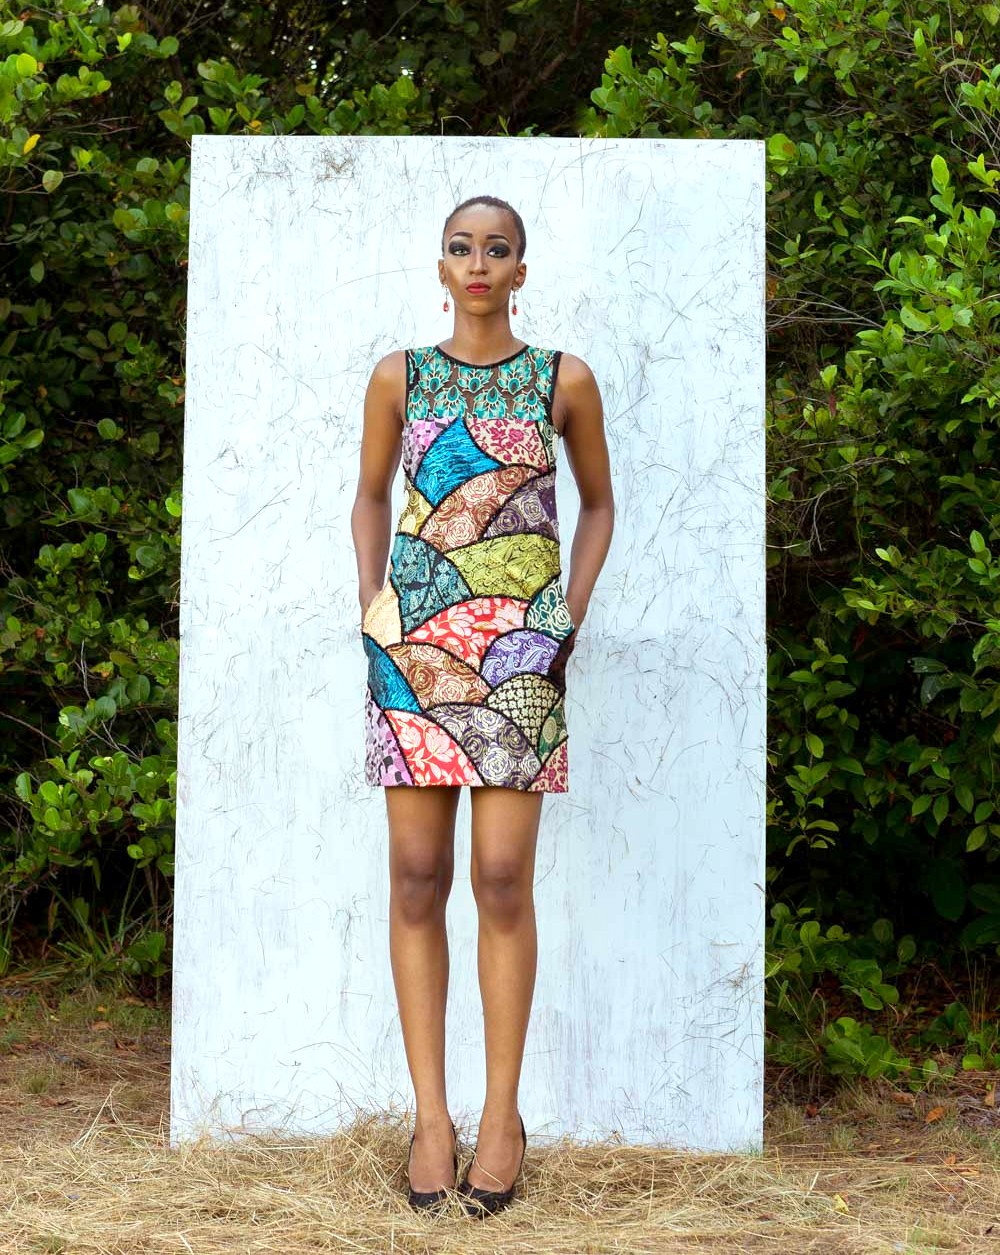 Nigerian fashion blogger and model Cassie Daves for Moofa designs